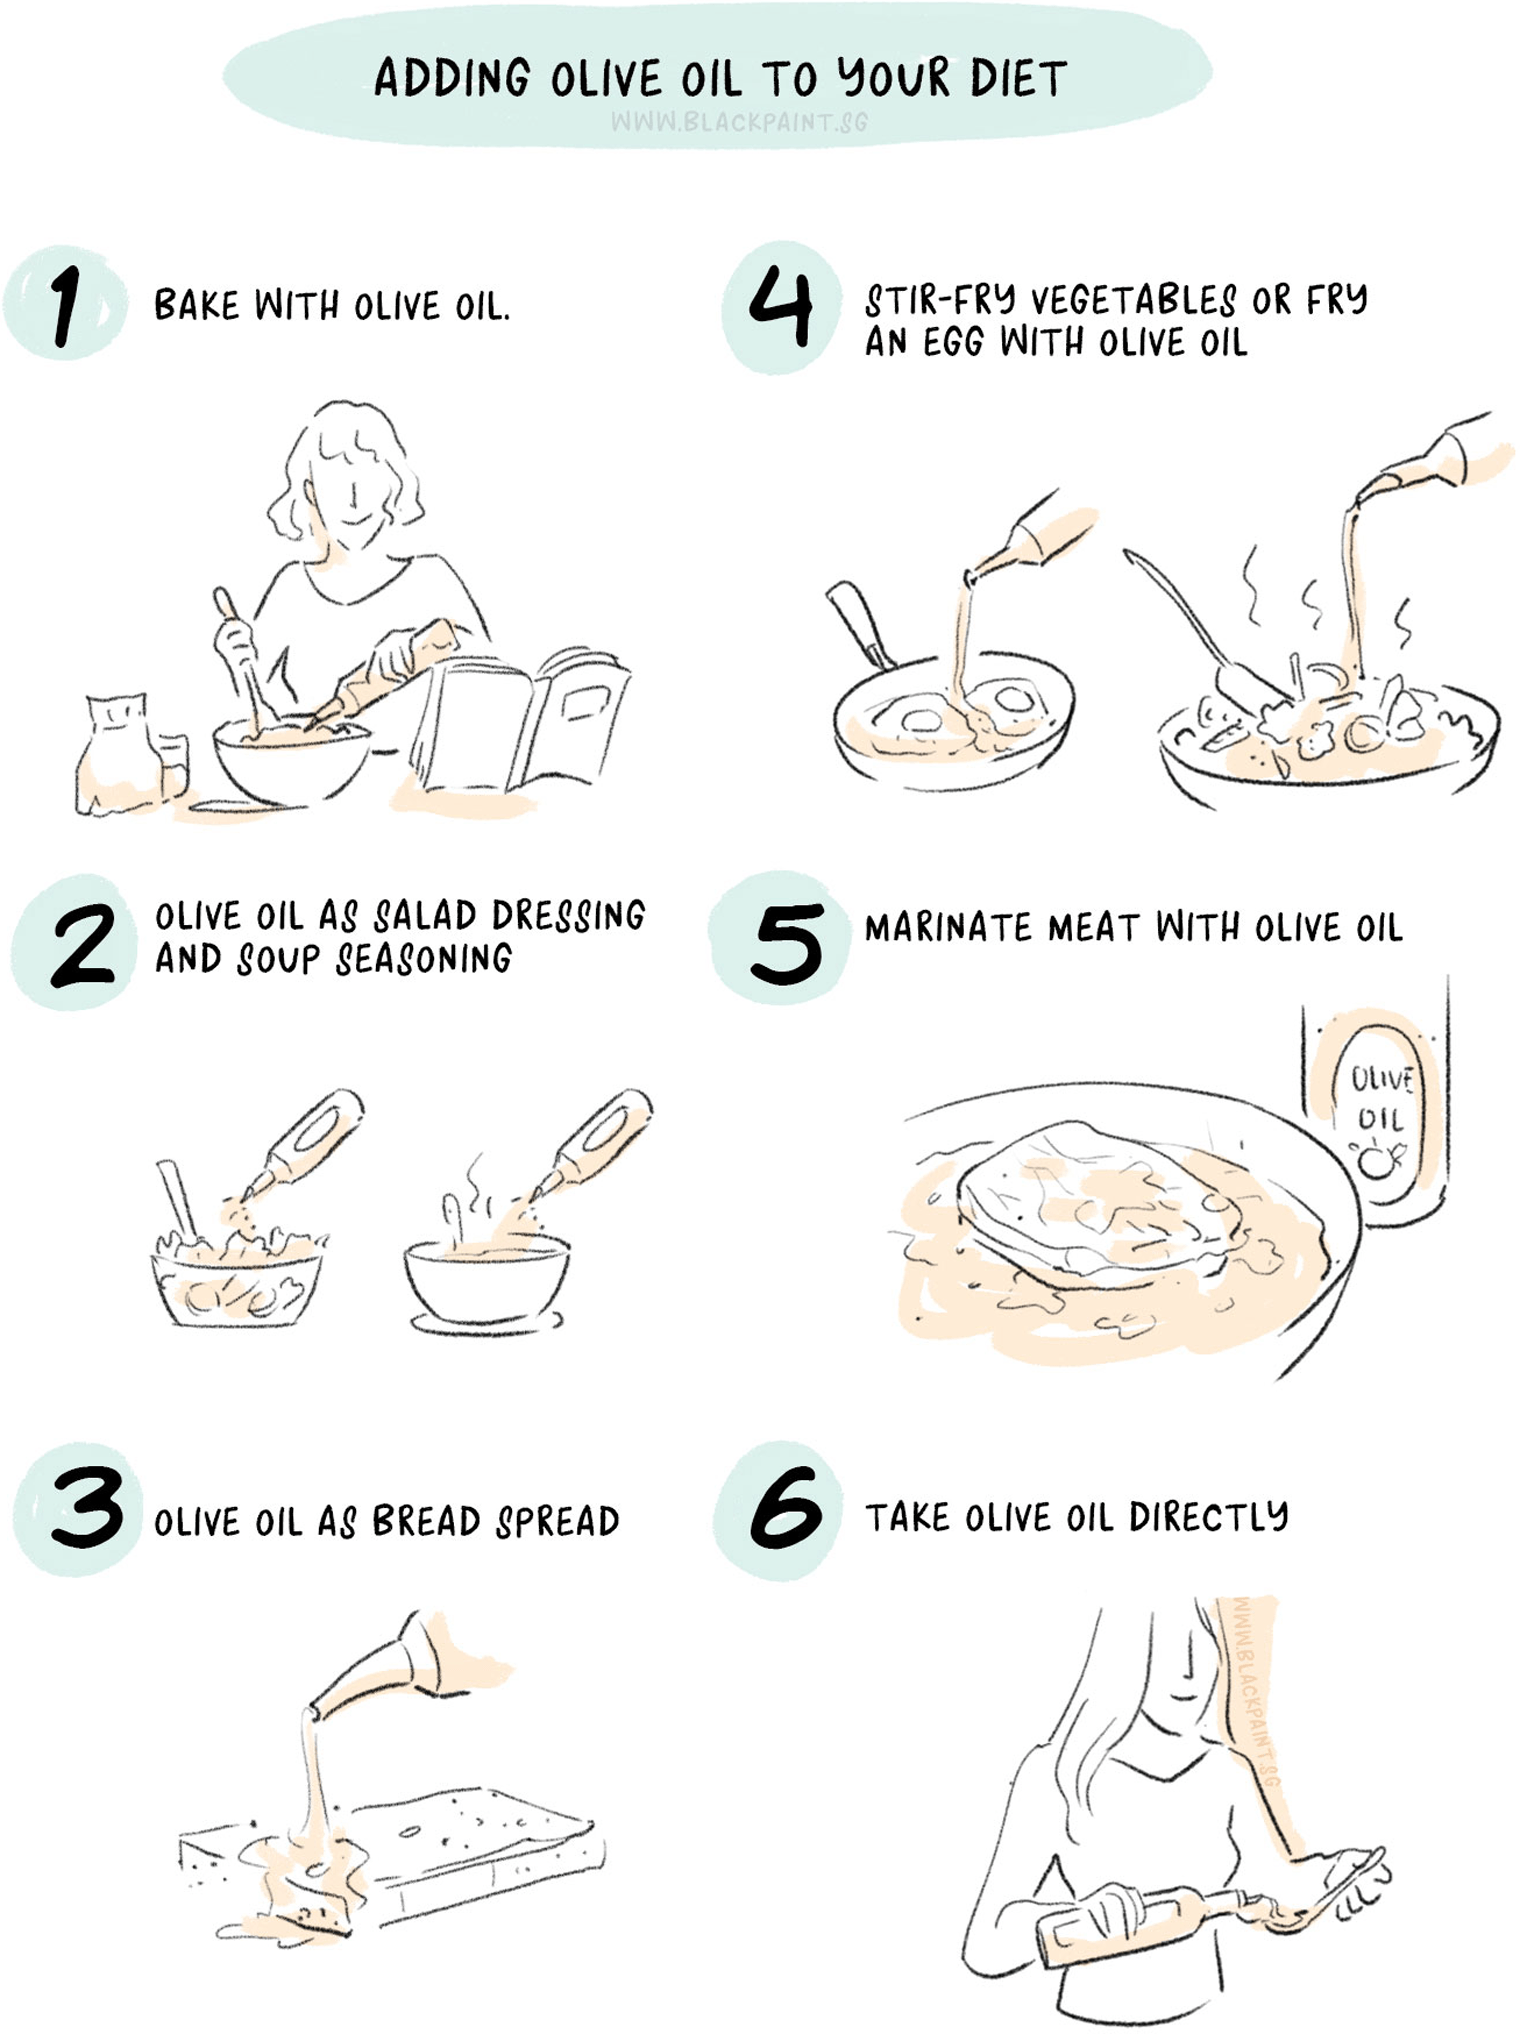 Hand drawn illustration of adding olive oil to your diet is easy with simple steps